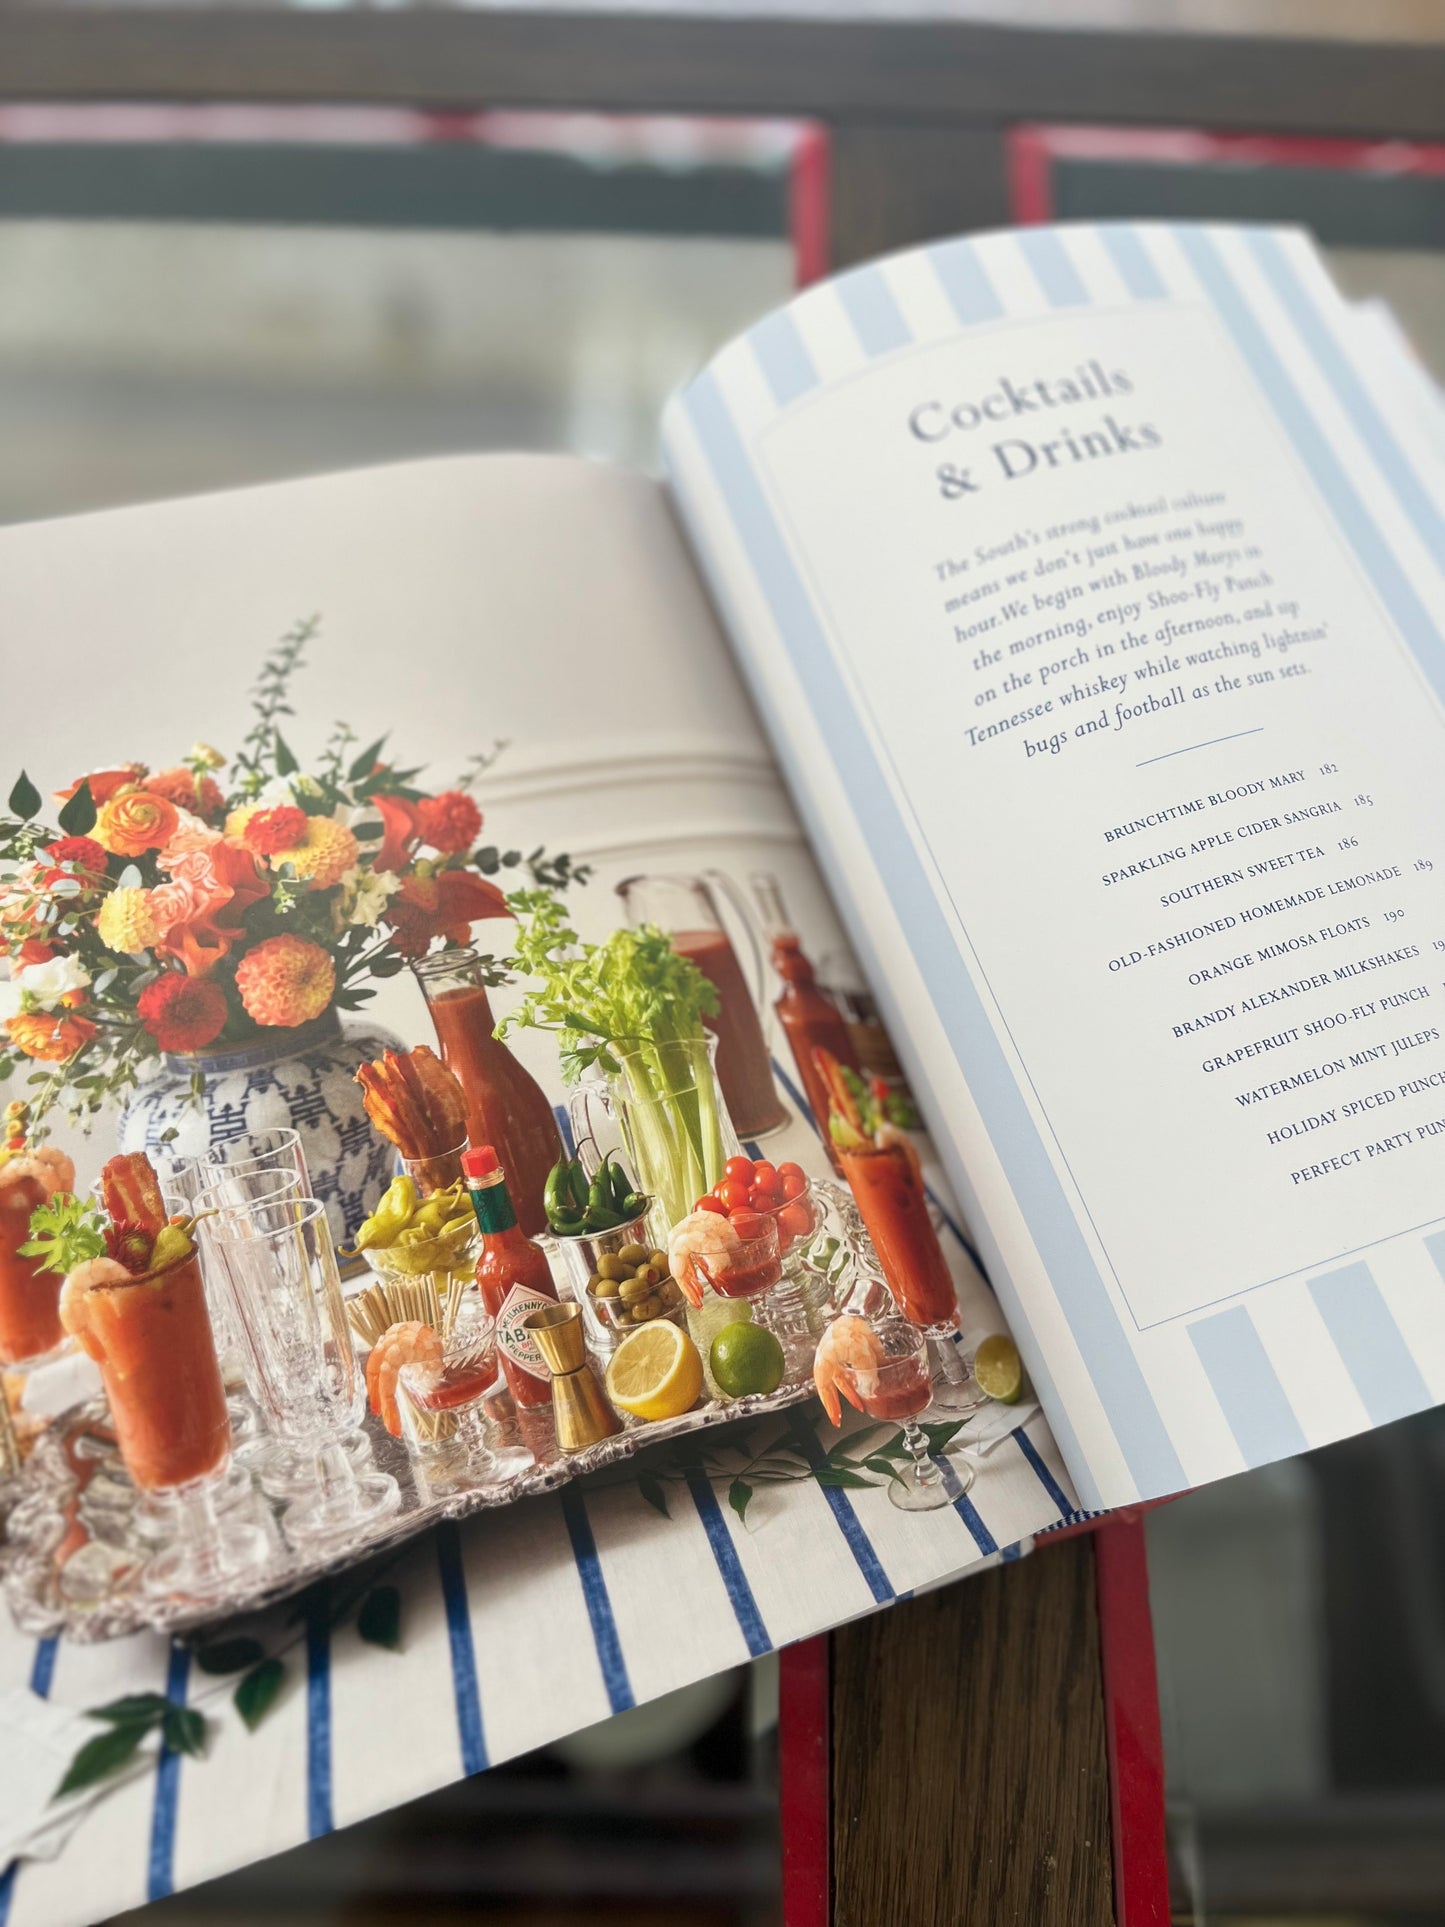 The Southern Entertainer's Cookbook: Heirloom Recipes for Modern Gatherings